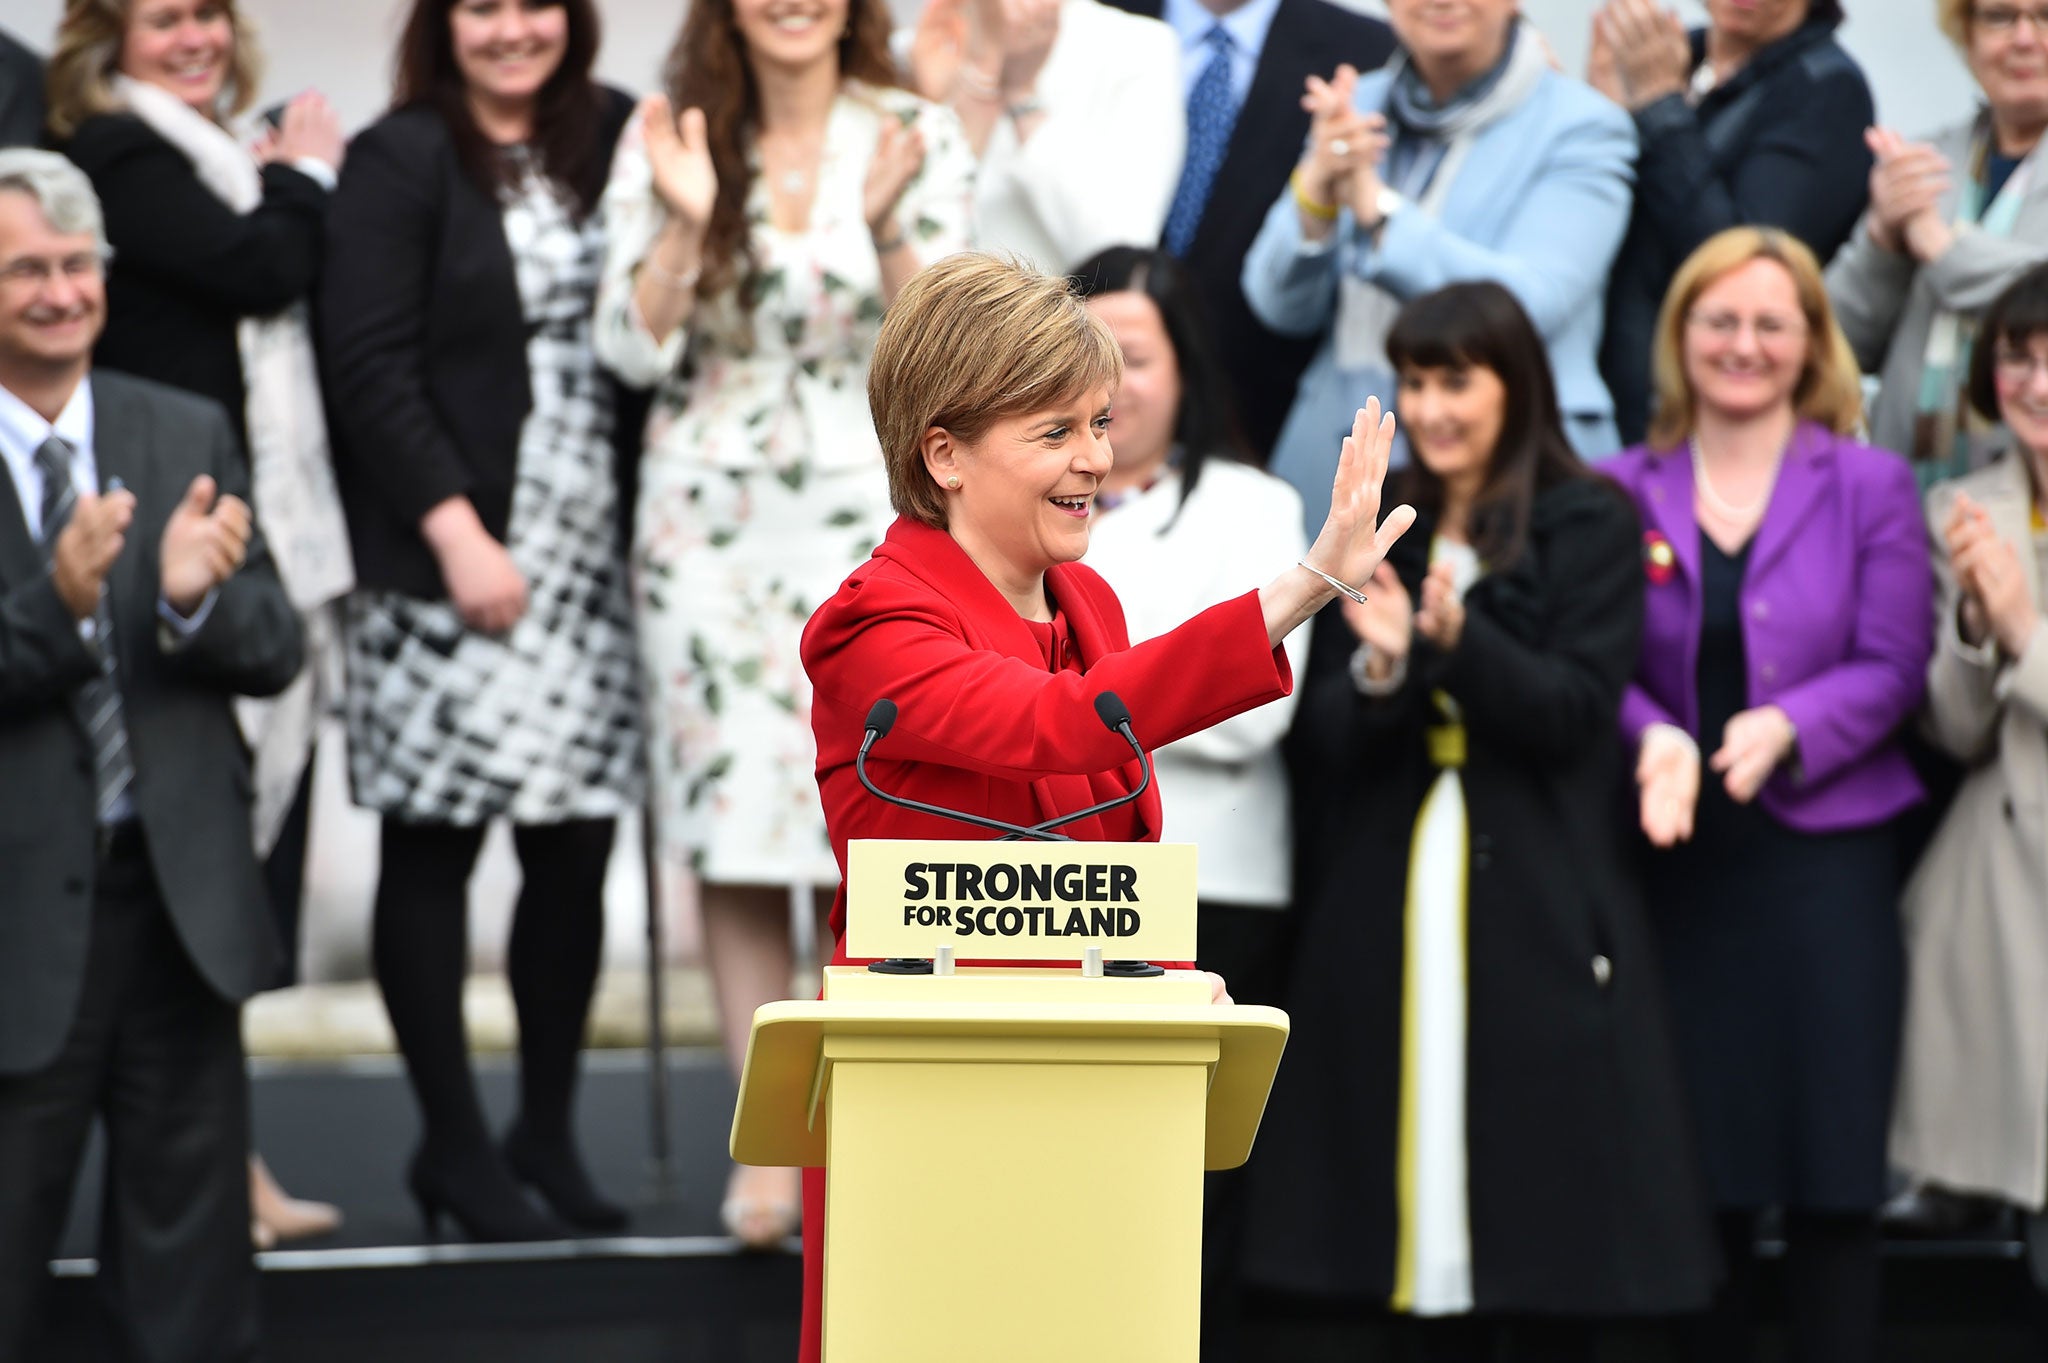 Sturgeon said: 'Scotland this week spoke more loudly and more clearly than ever before'